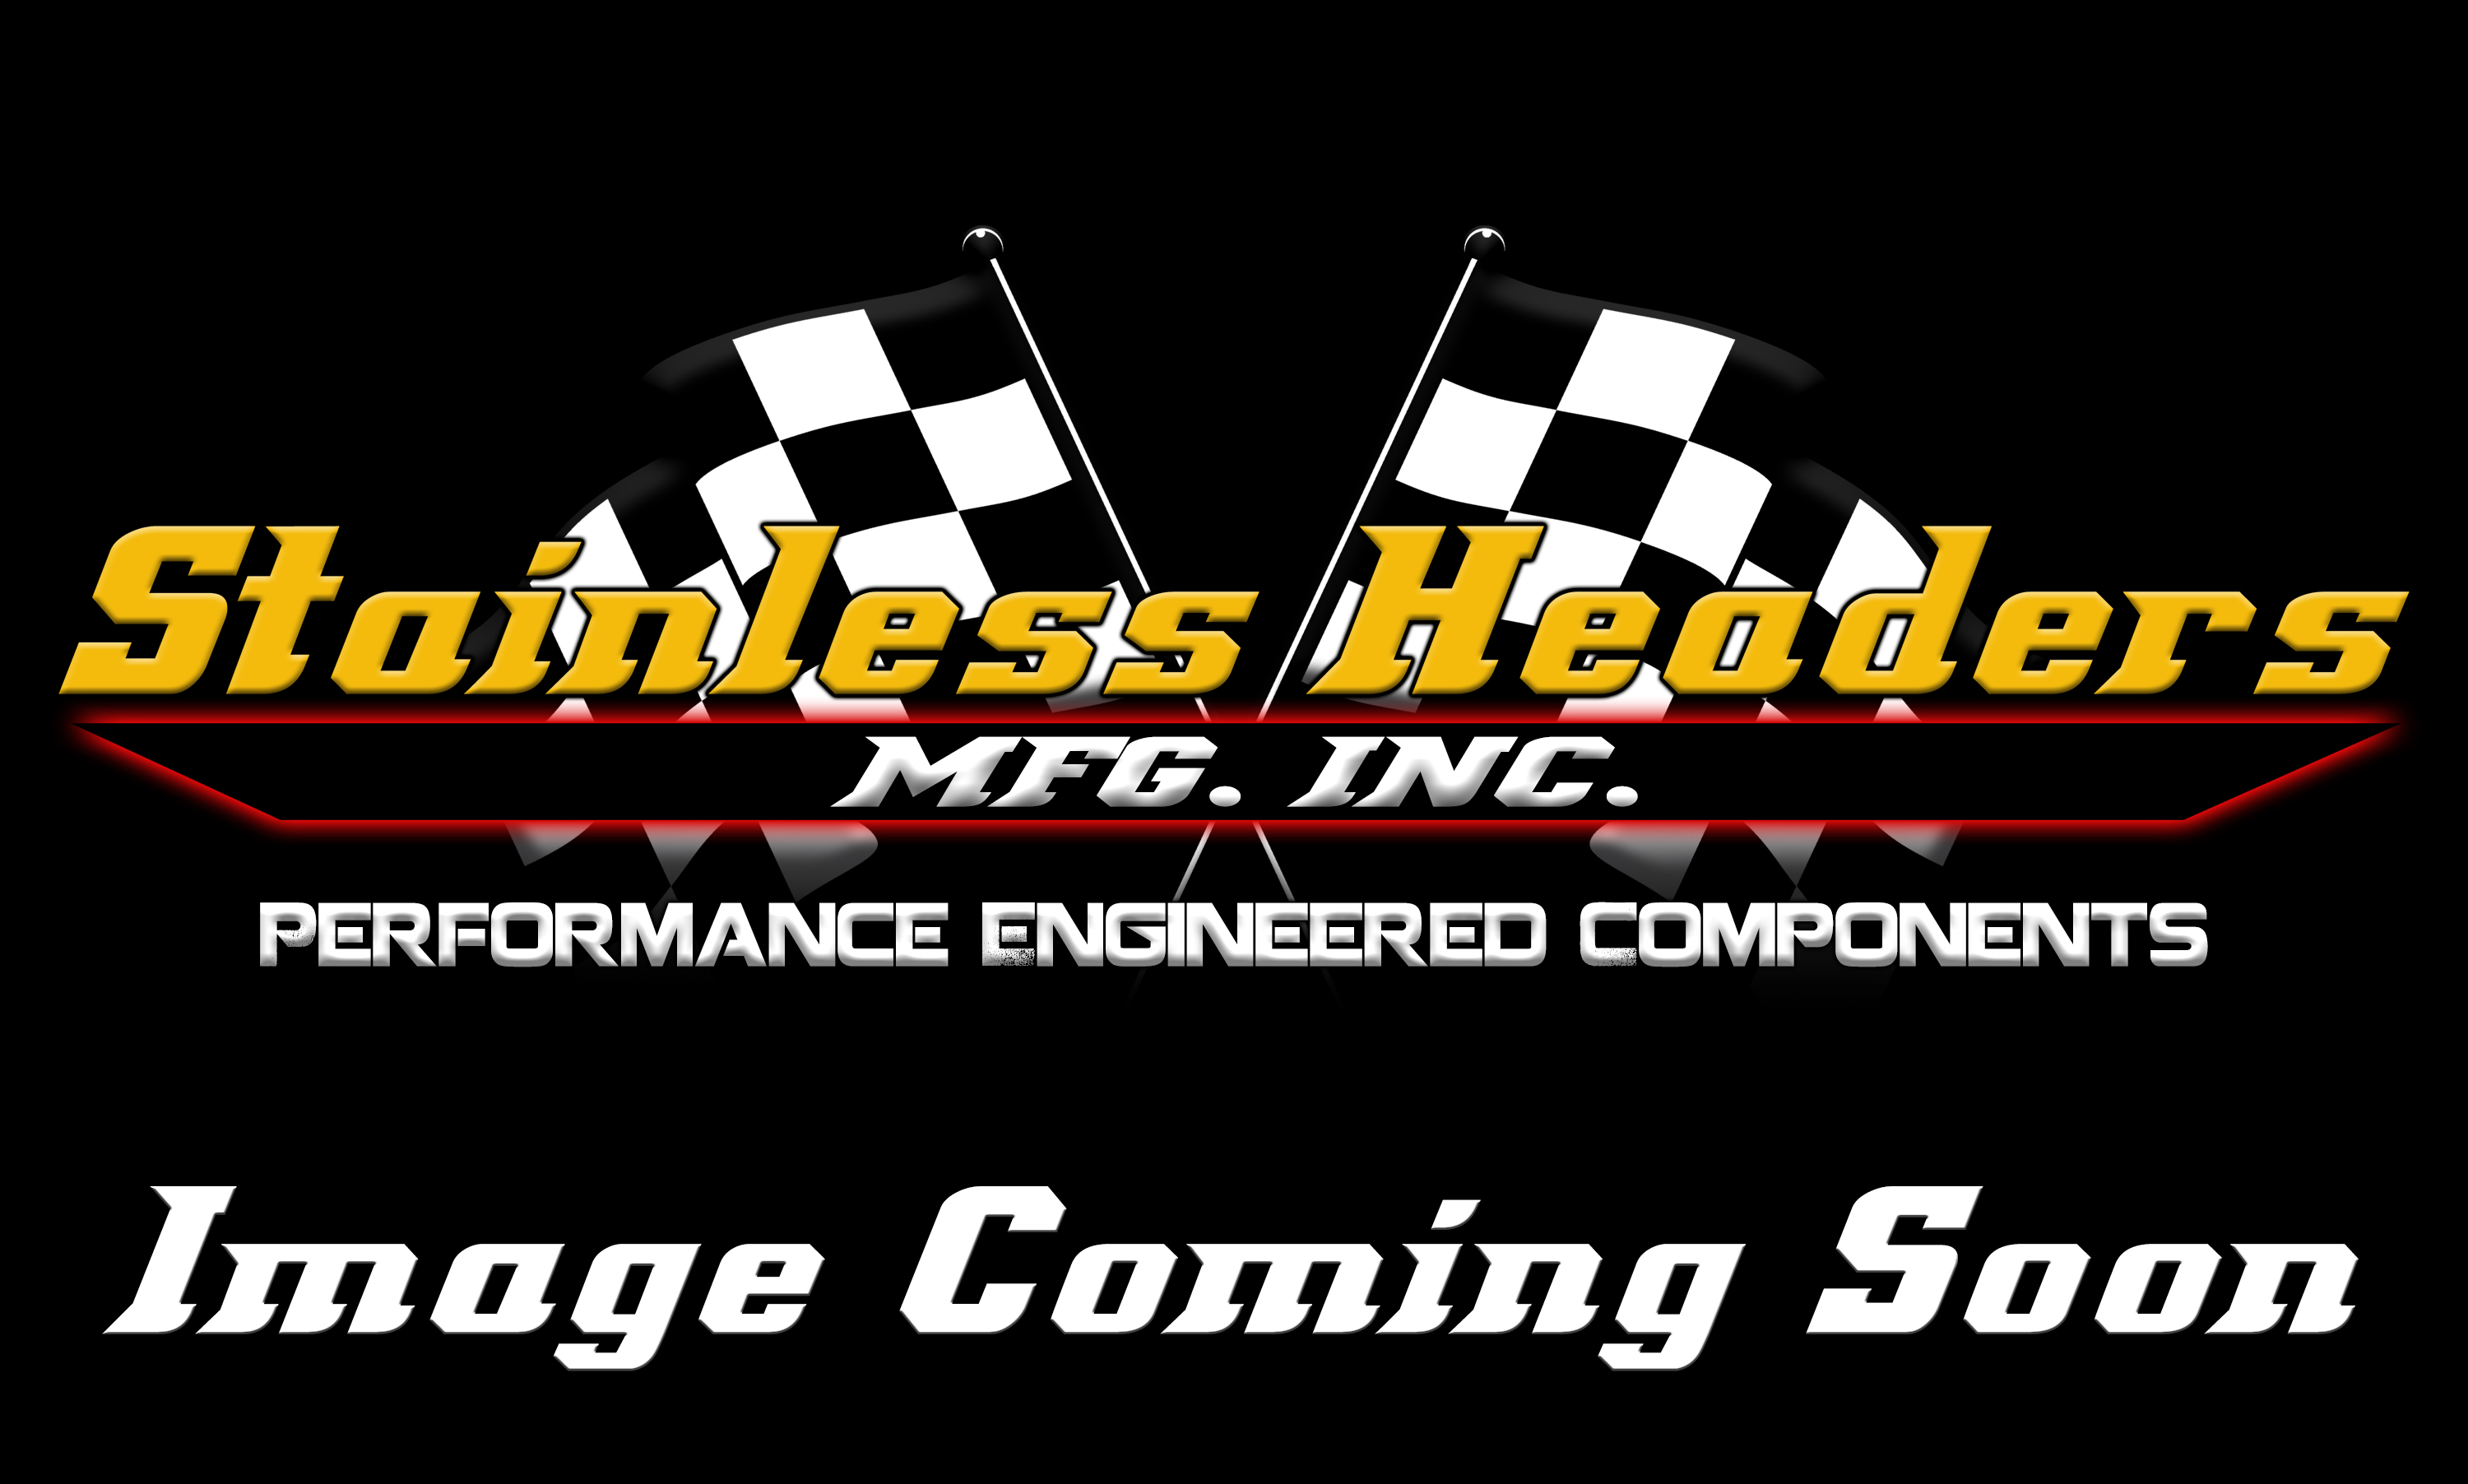 CompTurbo Technologies - CTR4202R-7290 Mid Frame Oil-Less 3.0 Turbocharger (1250 HP) - Image 1